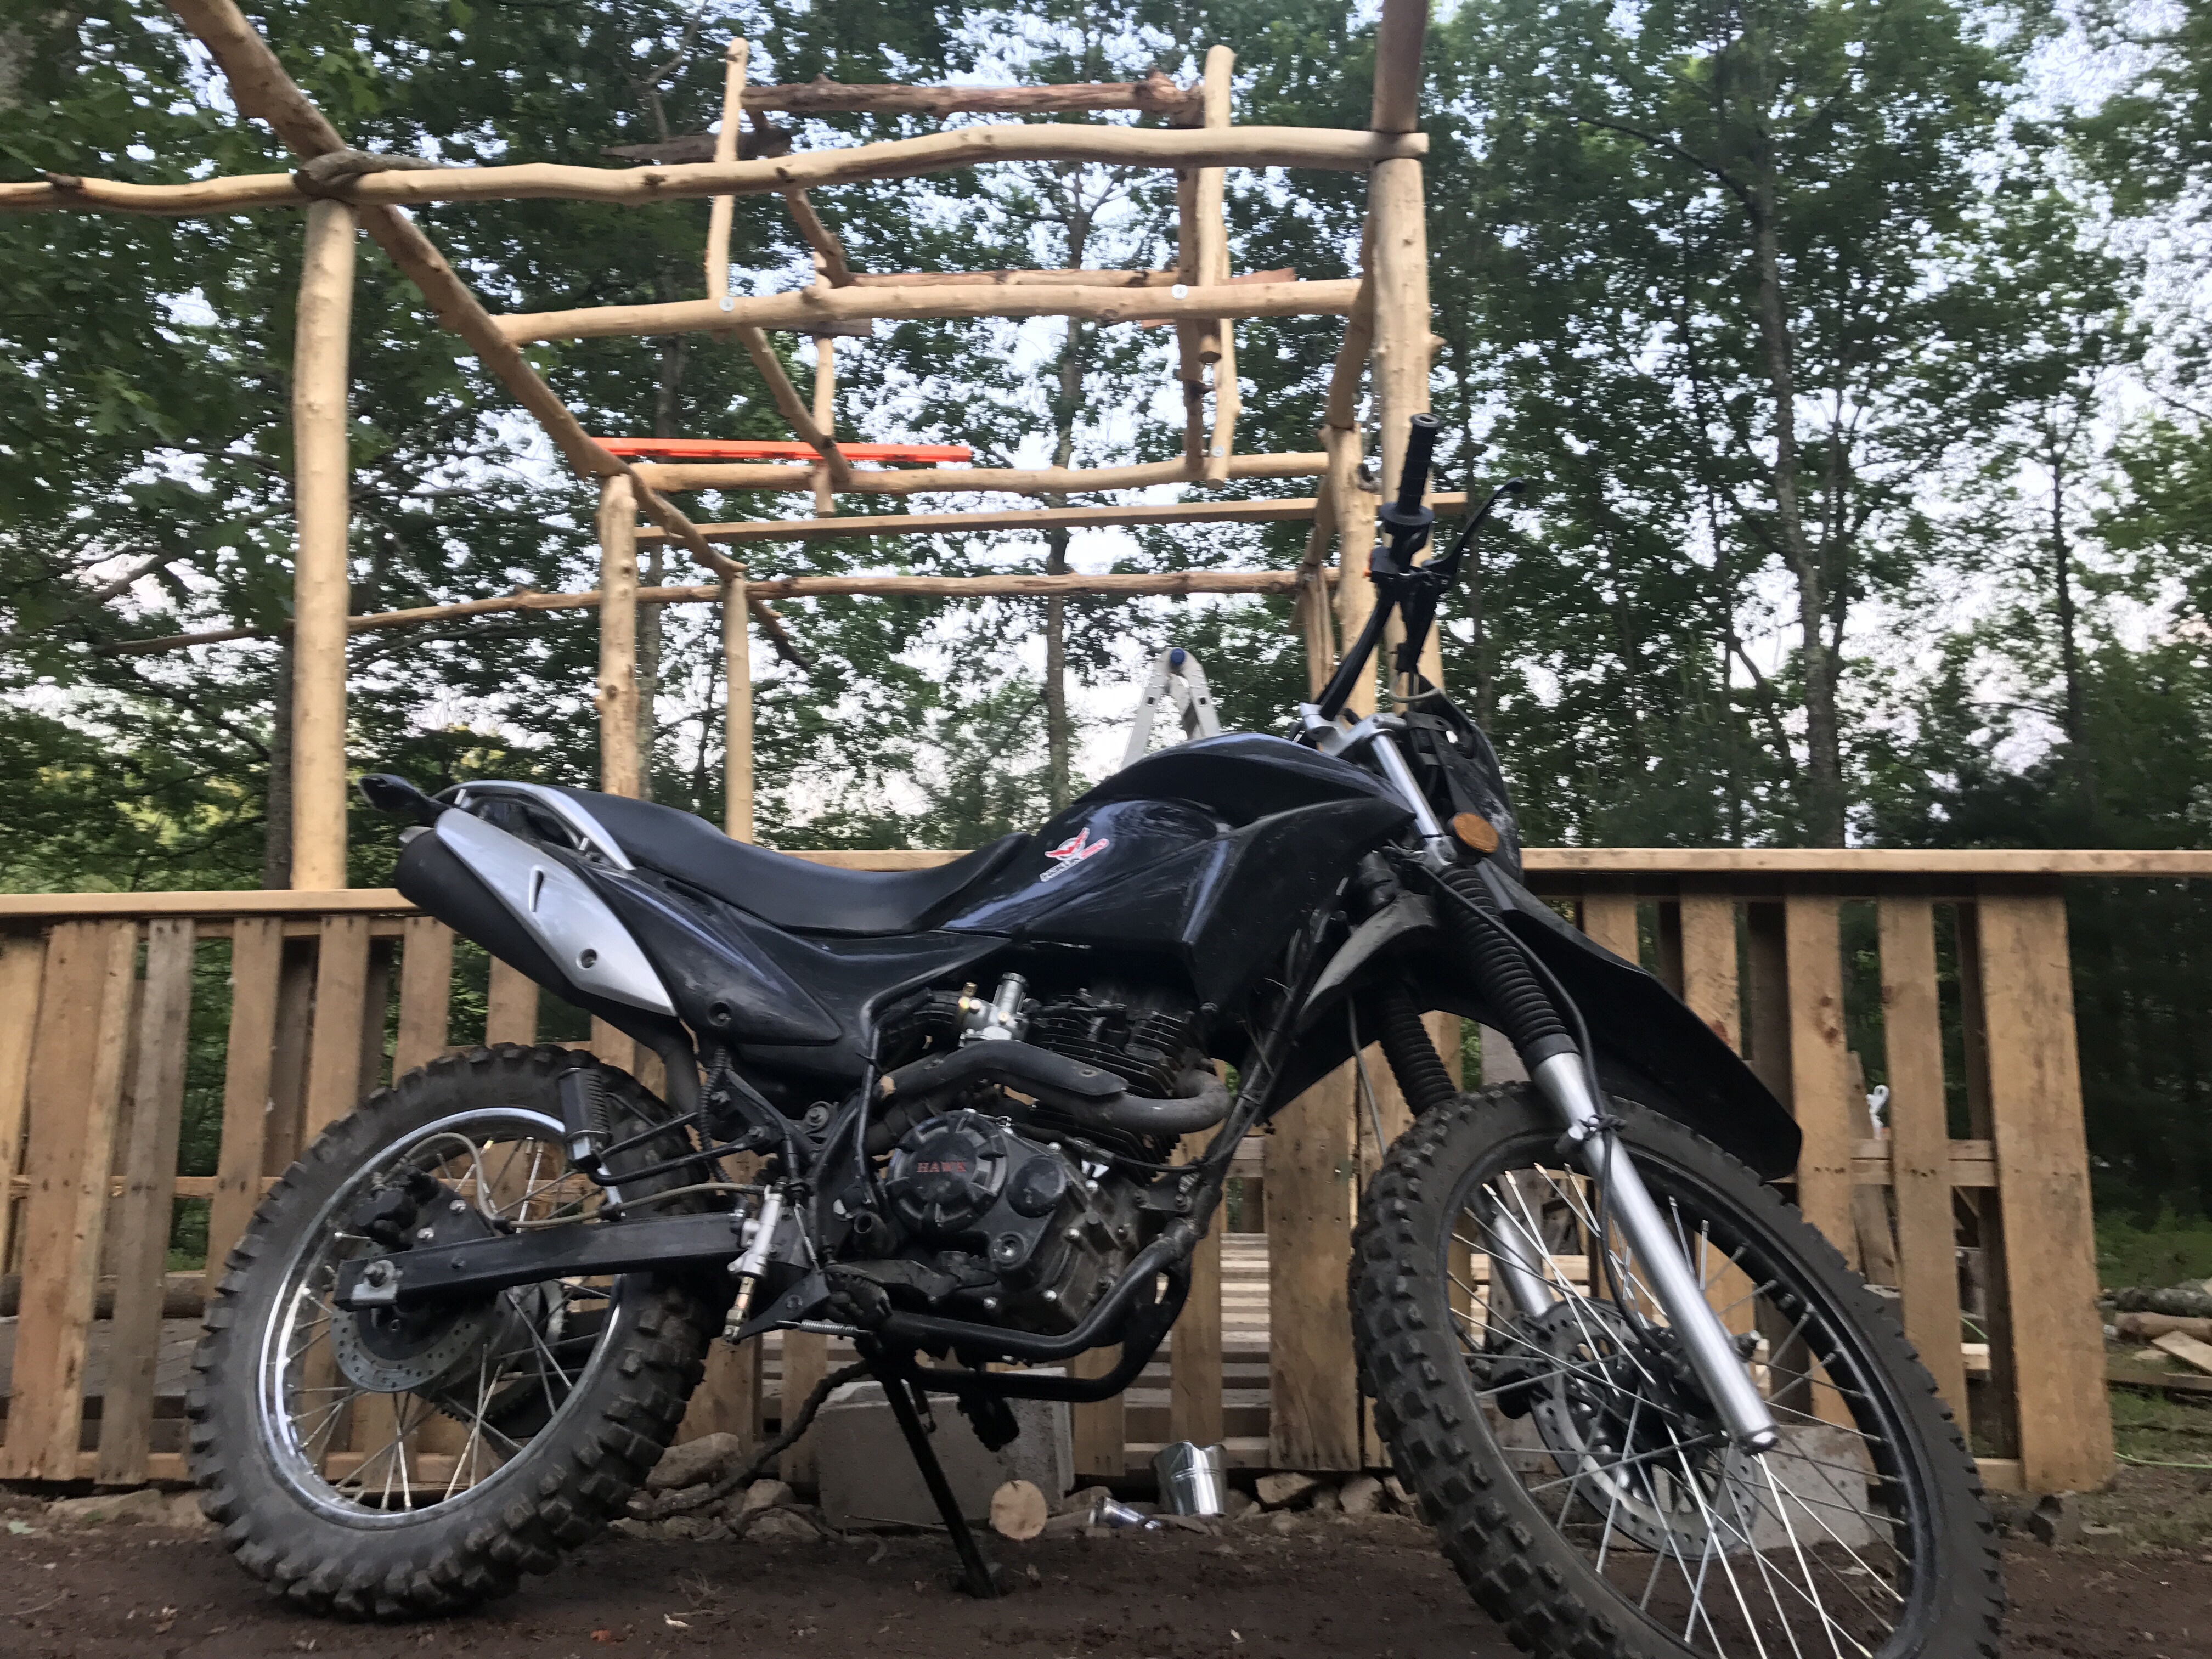 Just Some Quick Backyard Fun with Hawk 250 Dual Sport